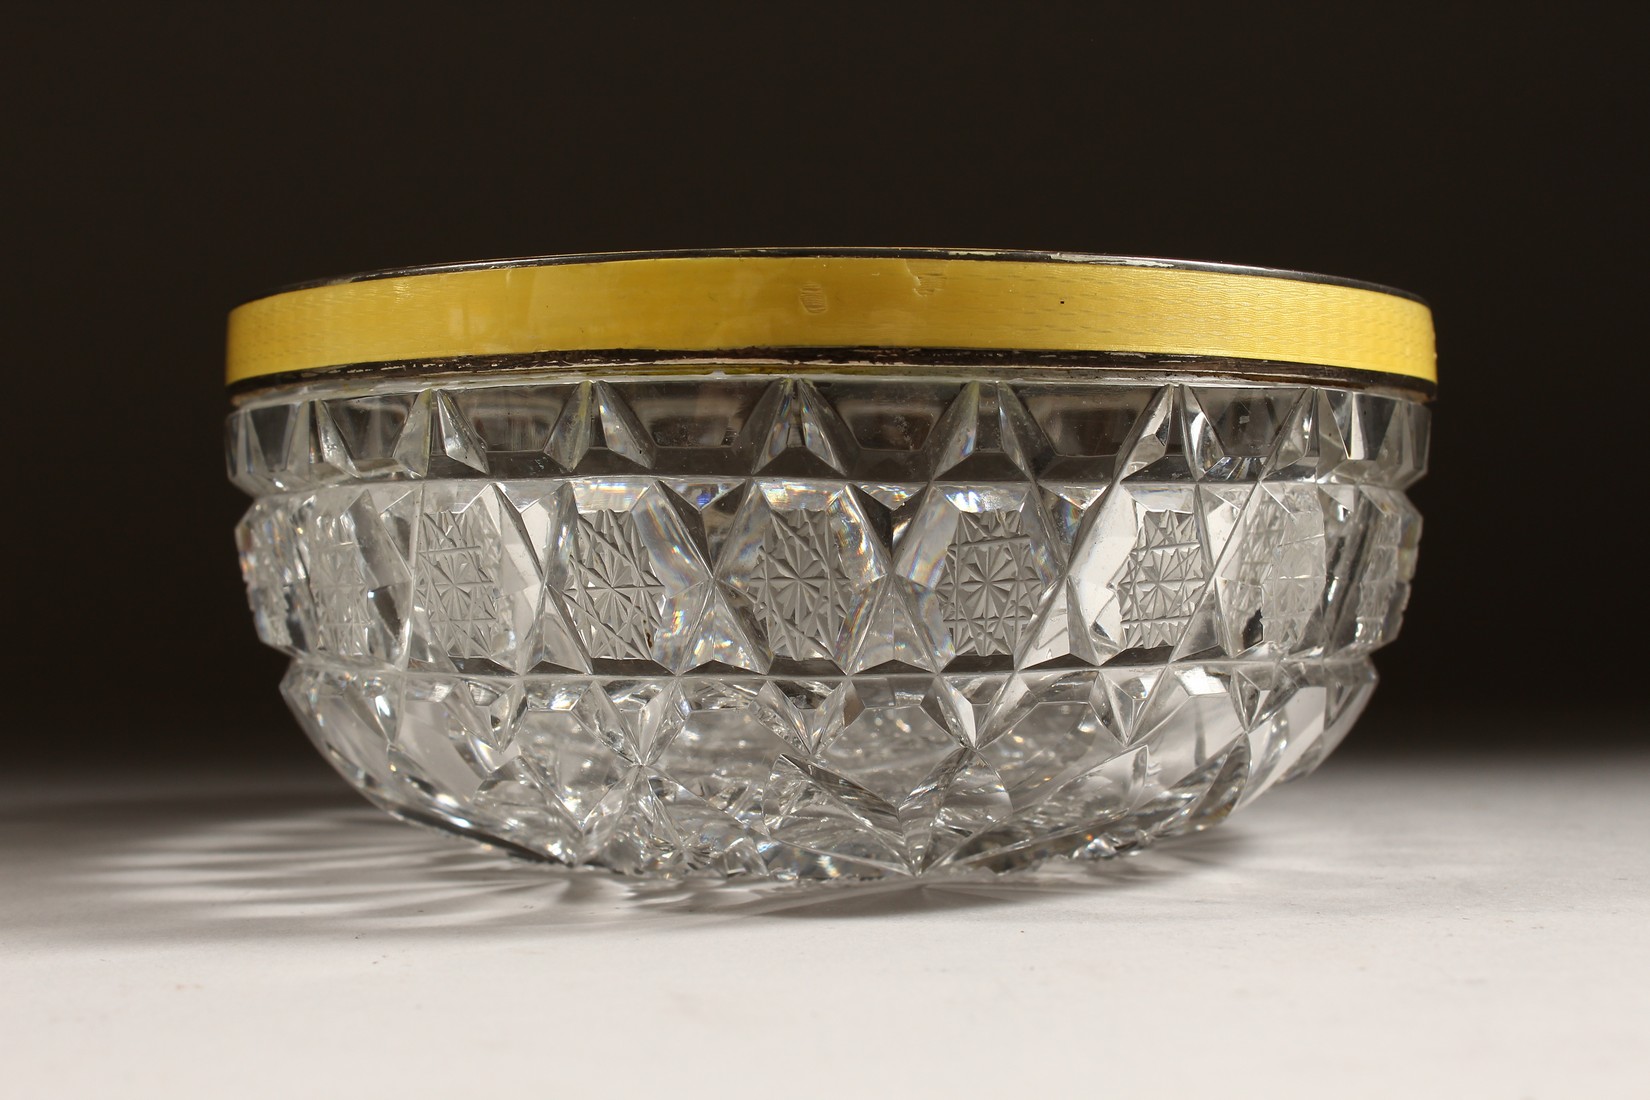 A CUT GLASS CIRCULAR BOWL with silver and yellow enamel rim 6ins diameter. - Image 4 of 8